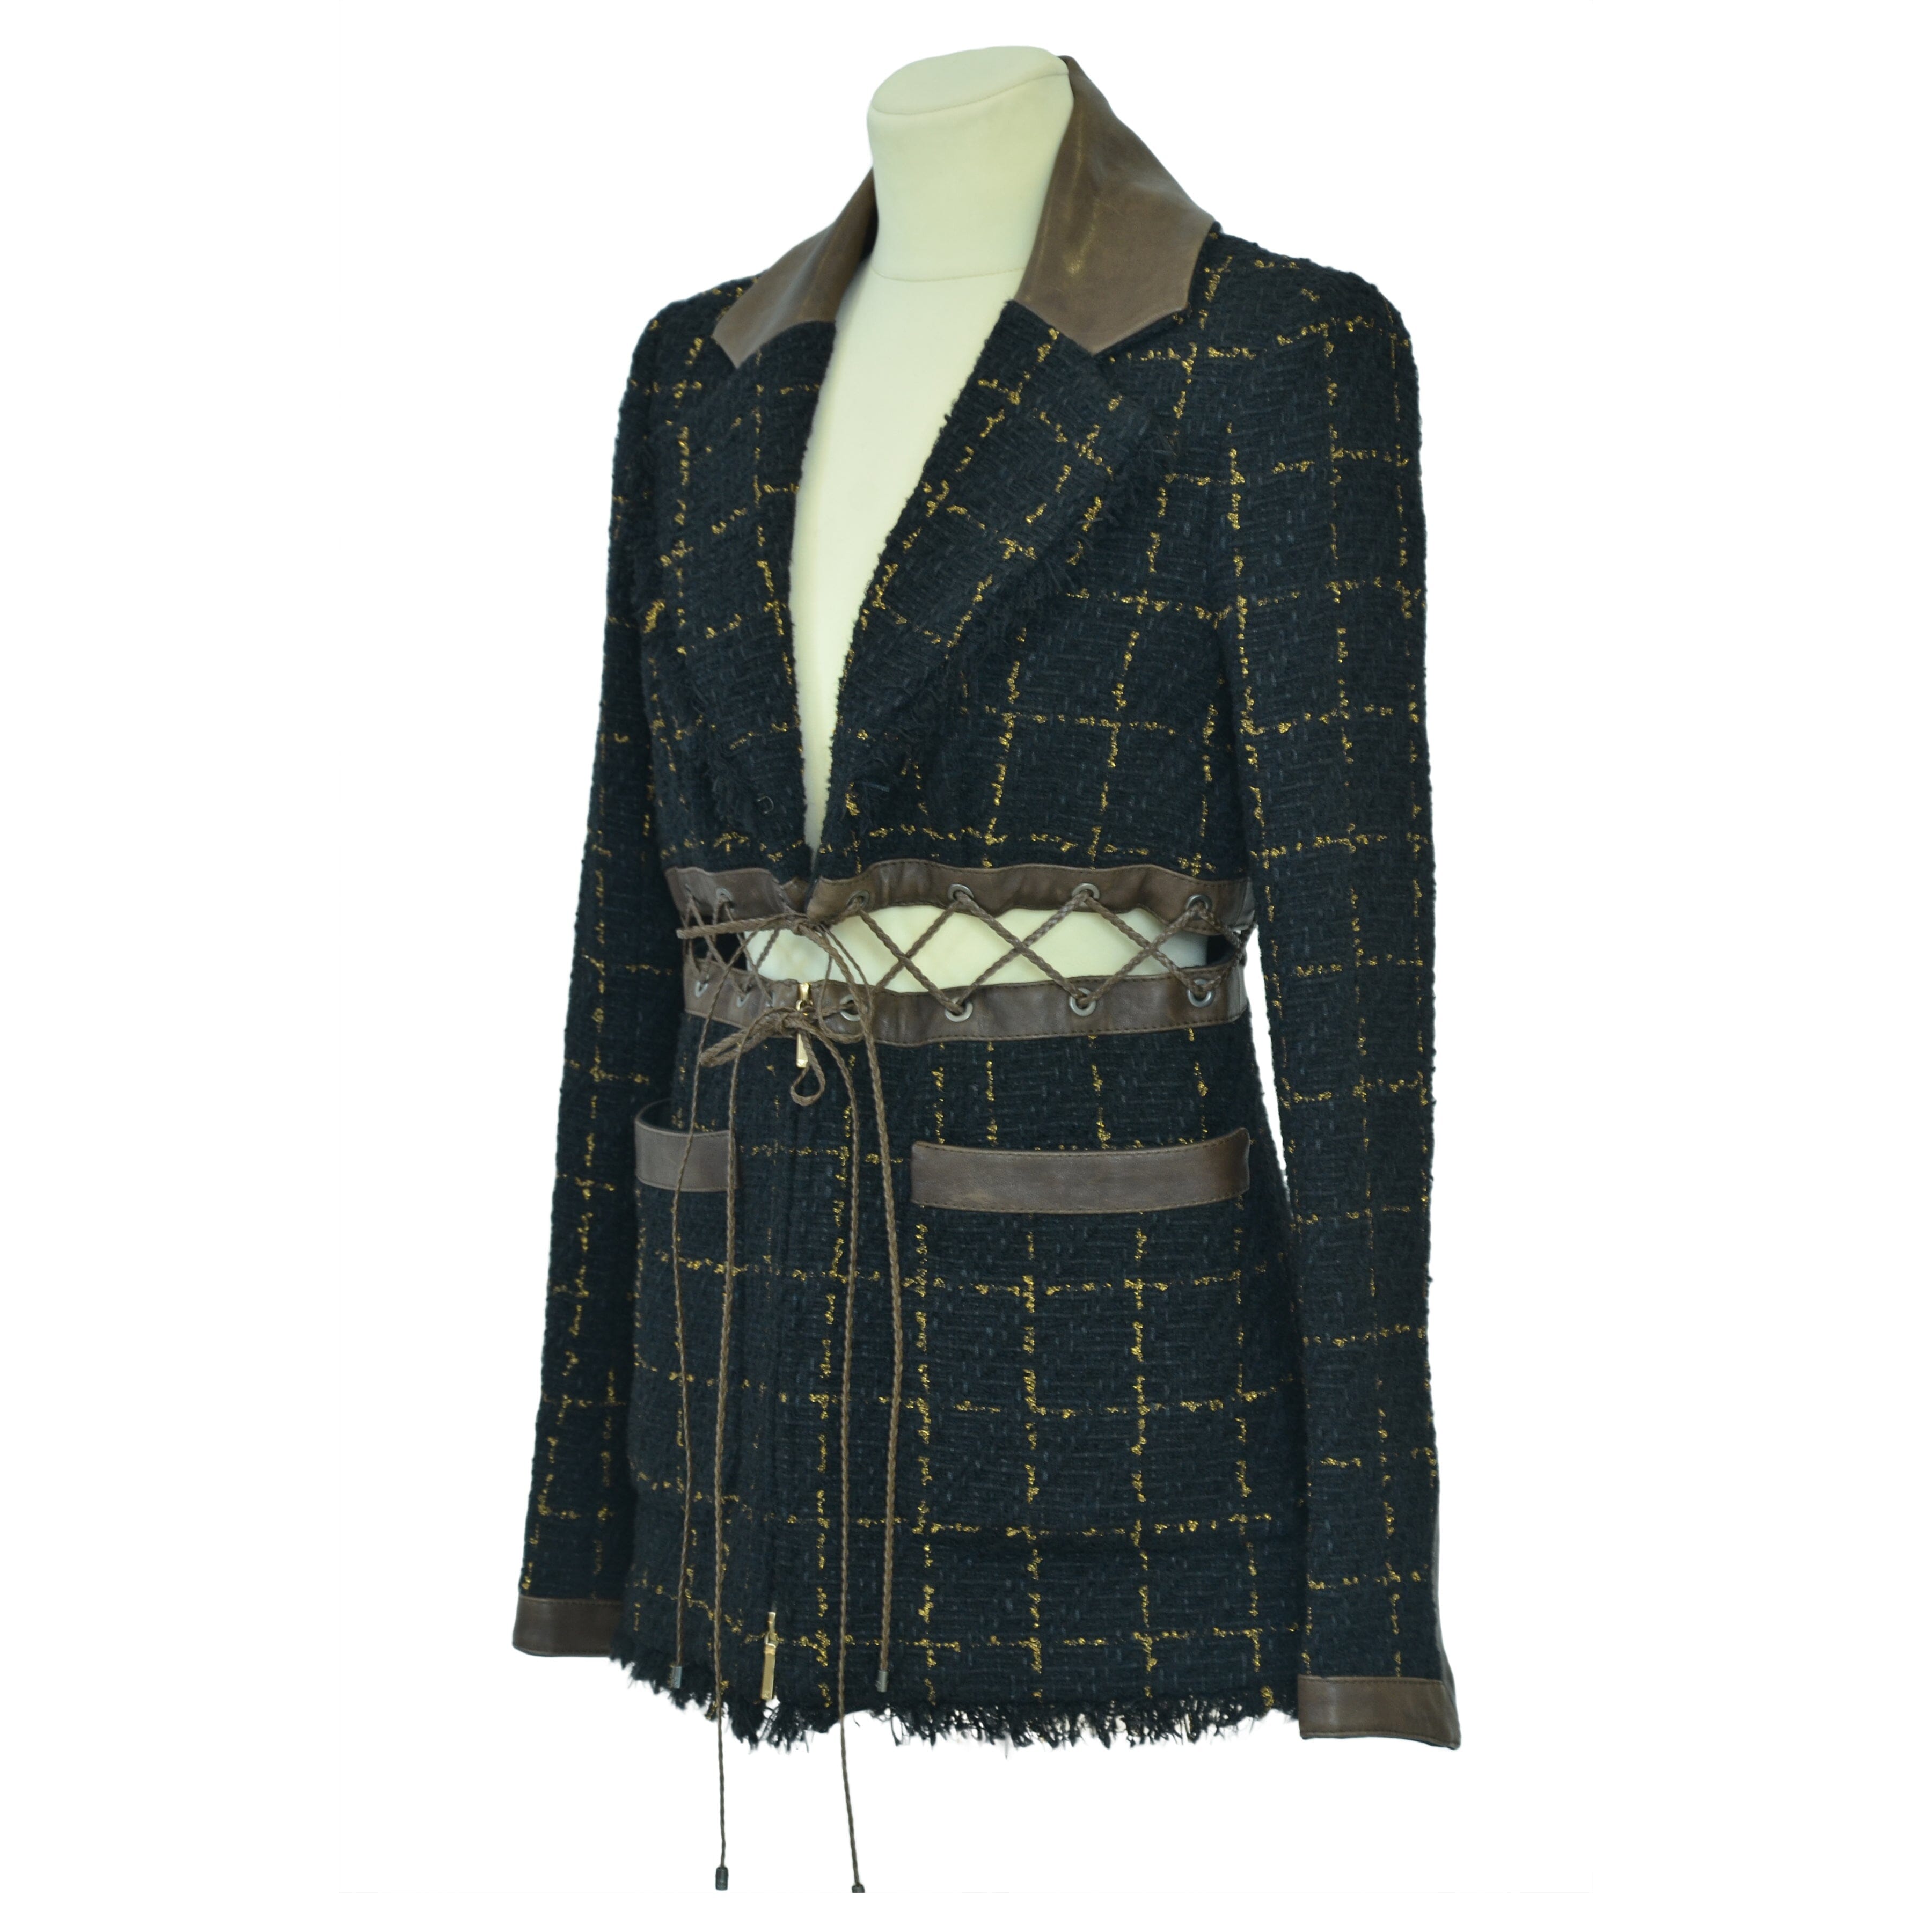 Black/Gold Fantasy Tweed Jacket with Leather Trims Clothing Chanel